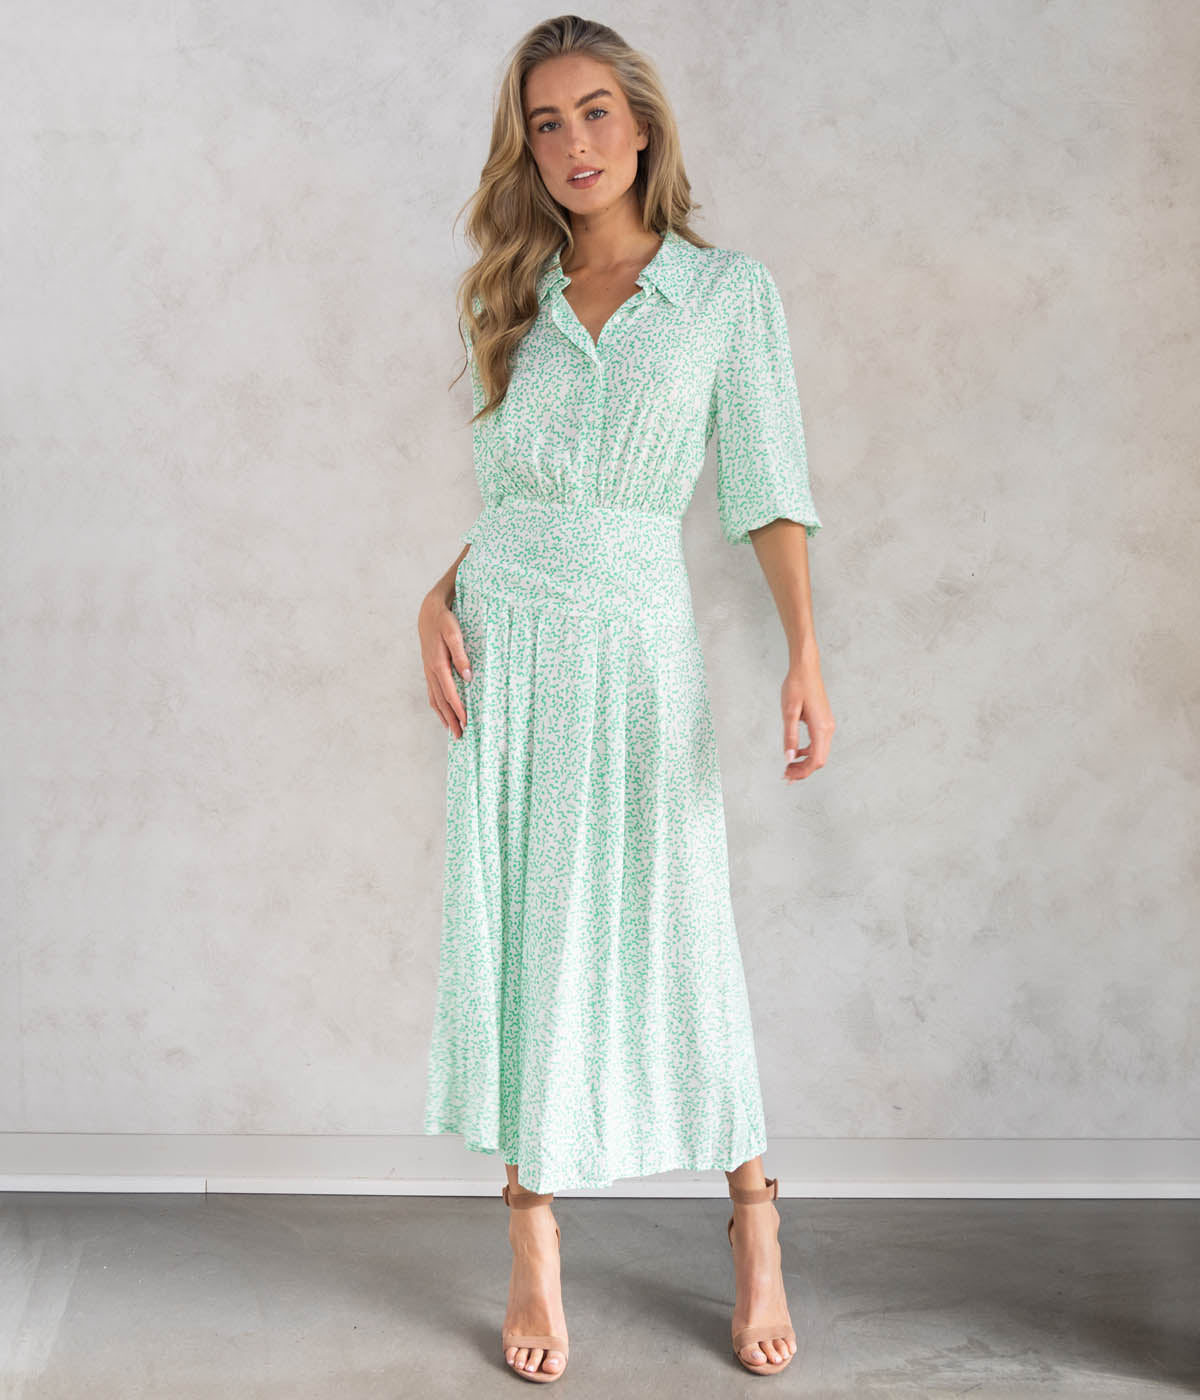 Izzy Dress in Squiggle Dusk ☀ Mint ...